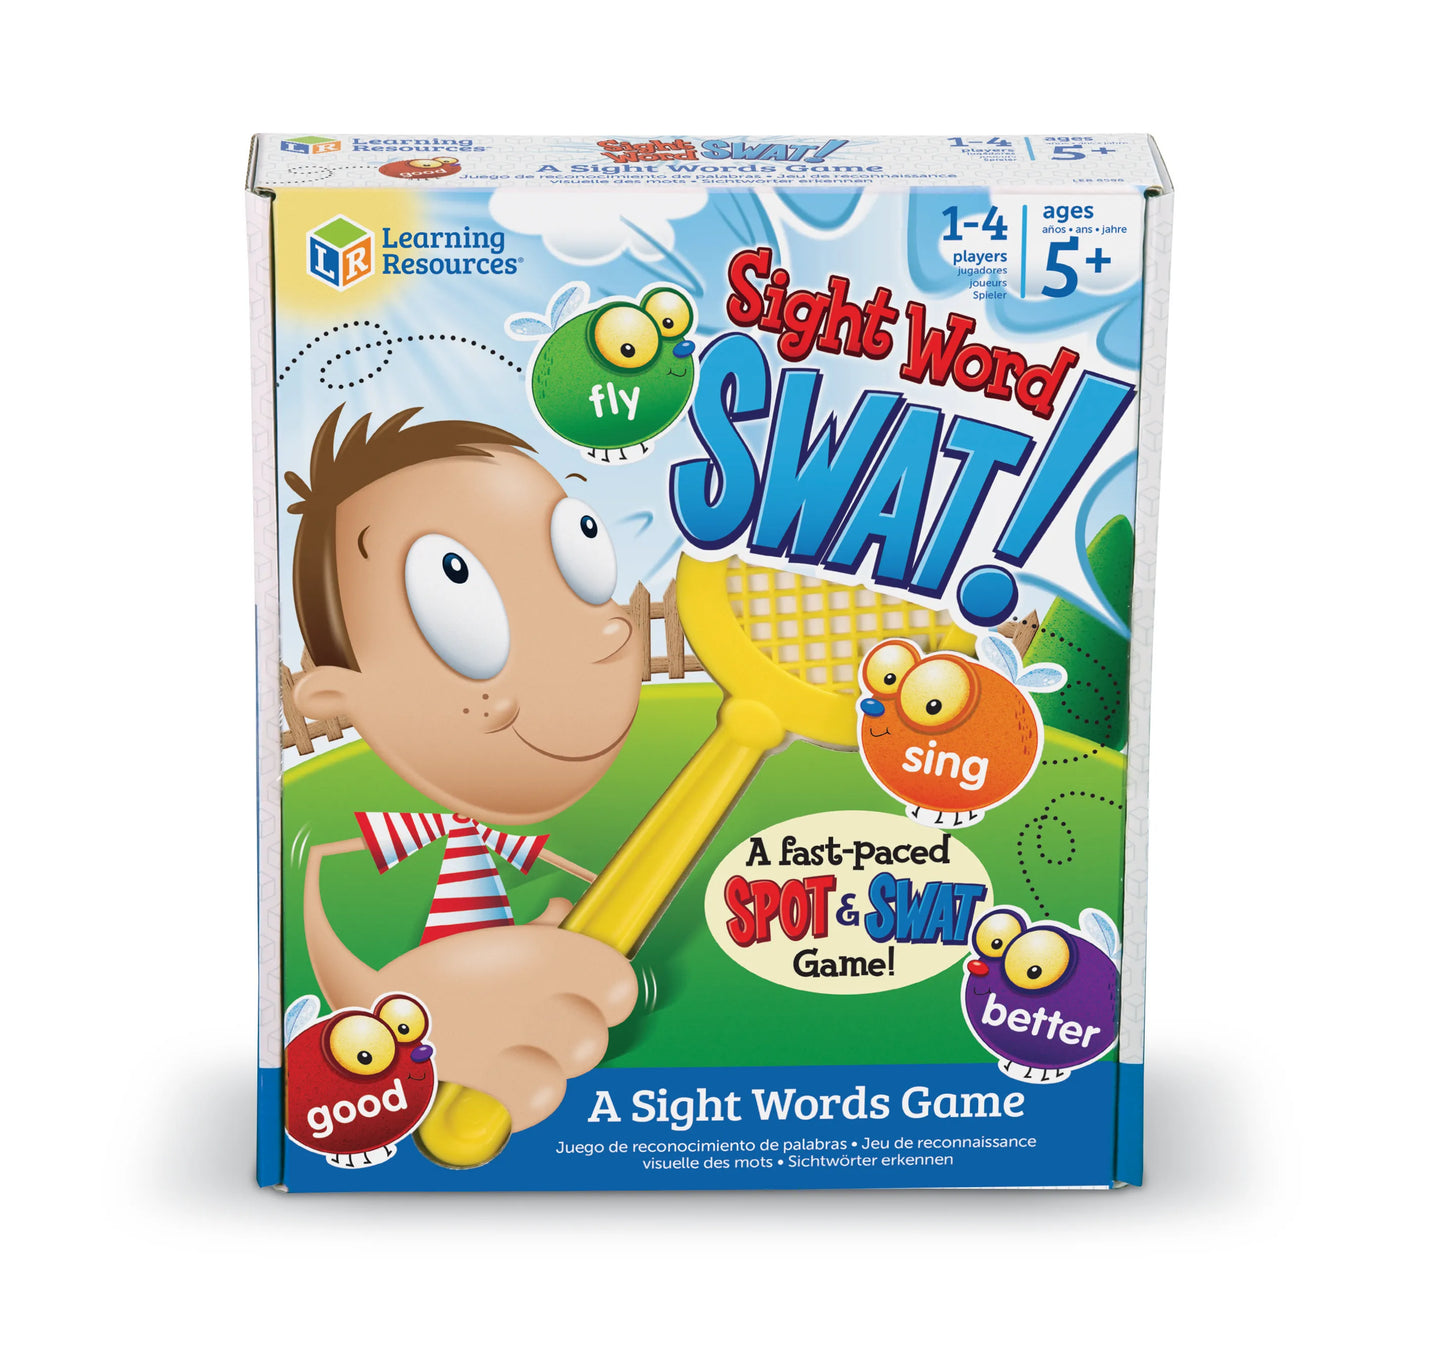 Learning Resources Sight Word SWAT!